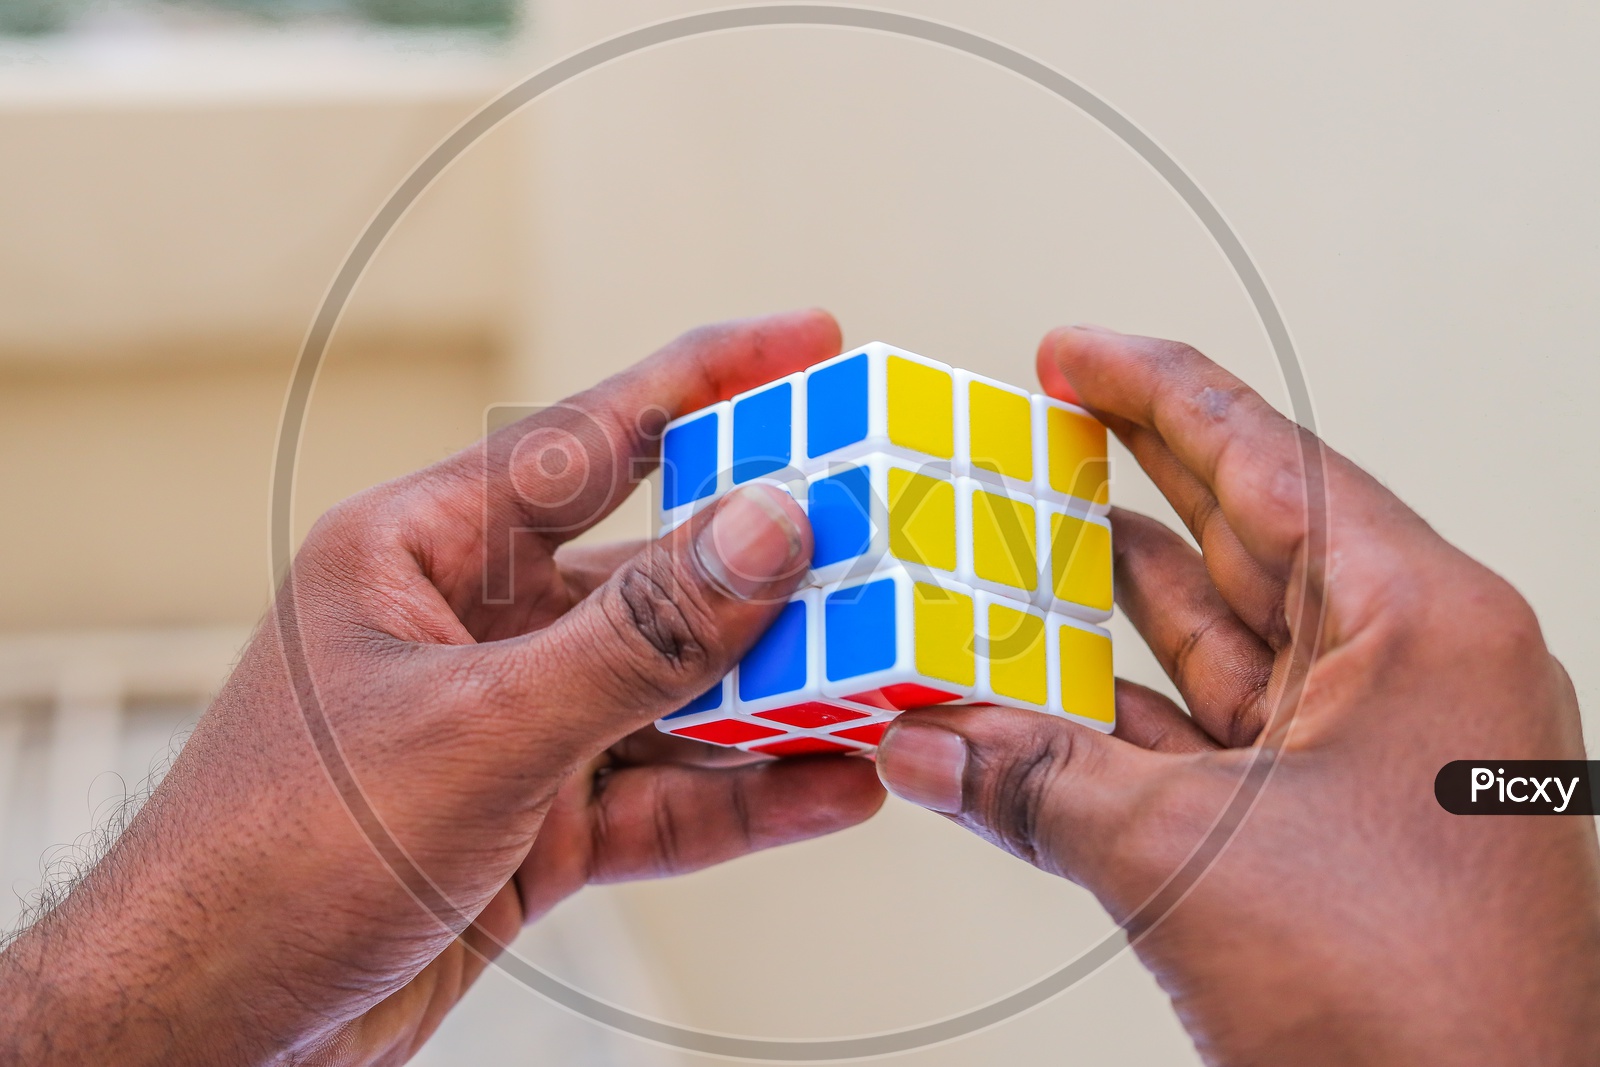 Hands and Rubik's cube puzzle isolated on the white background